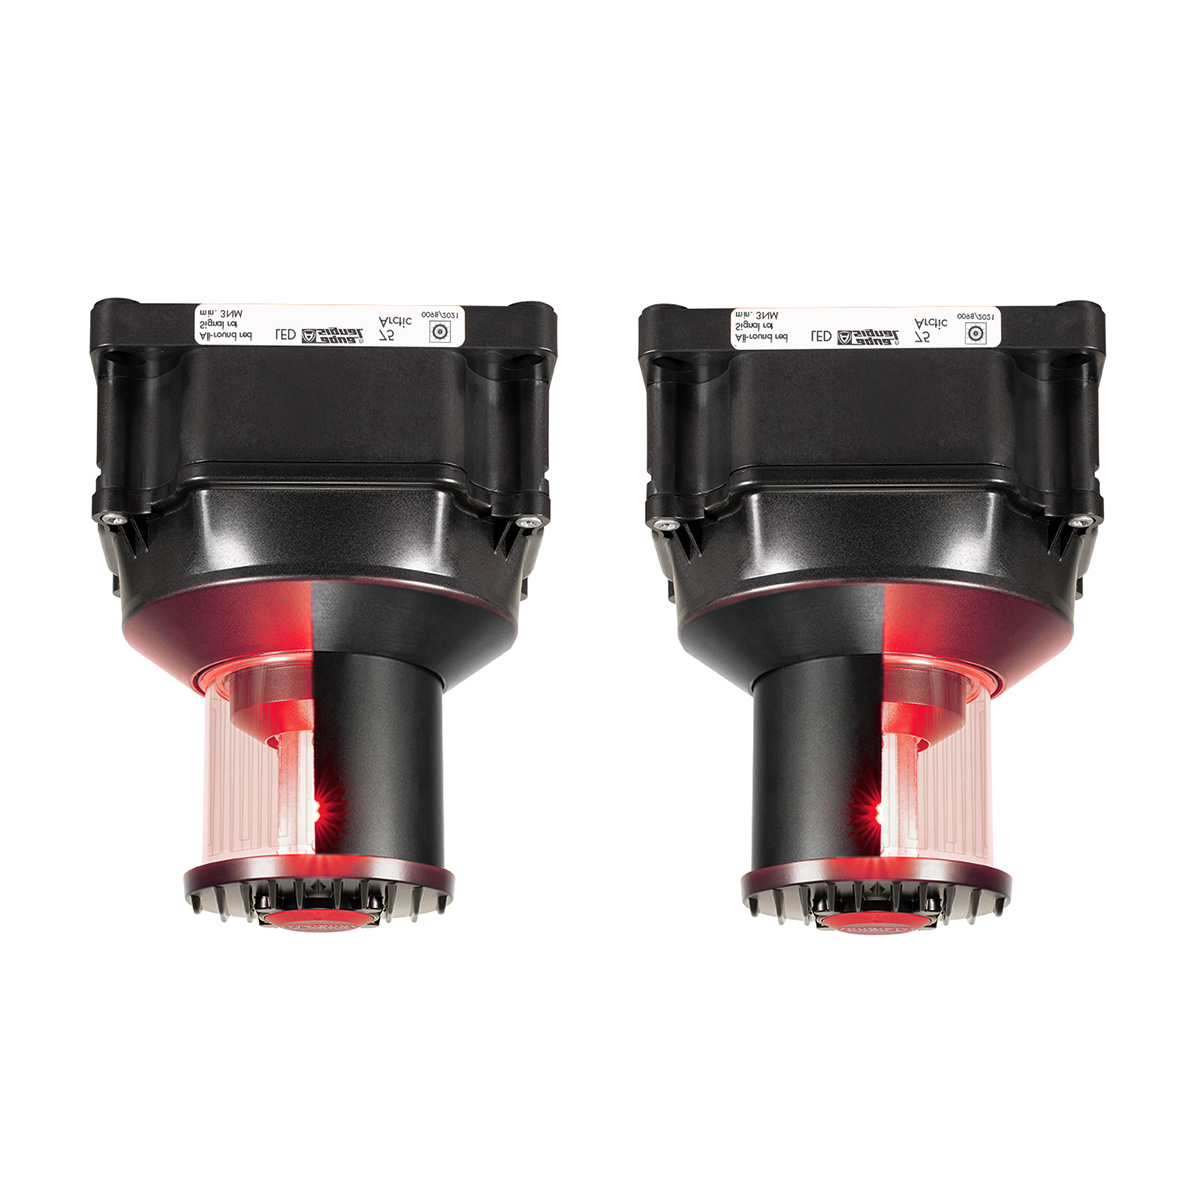 3675205007 75D LED Signal Red, main 115-230VAC/spare 115-230VAC UPSIDE DOWN 180°Starboard 180°Port Black, 3nm